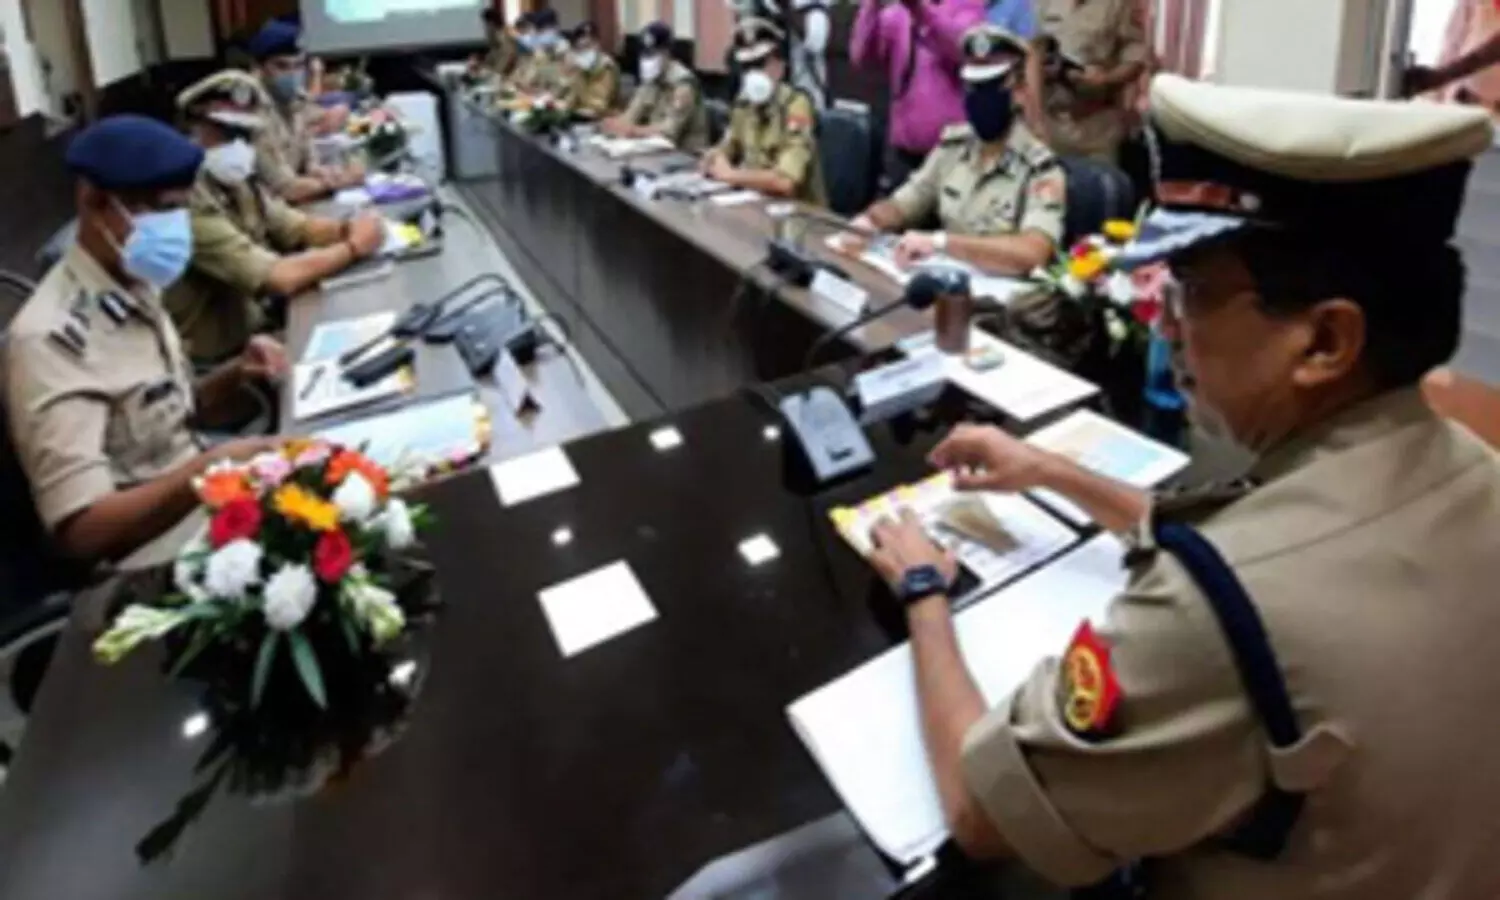 DGP Doing meeting with Officer